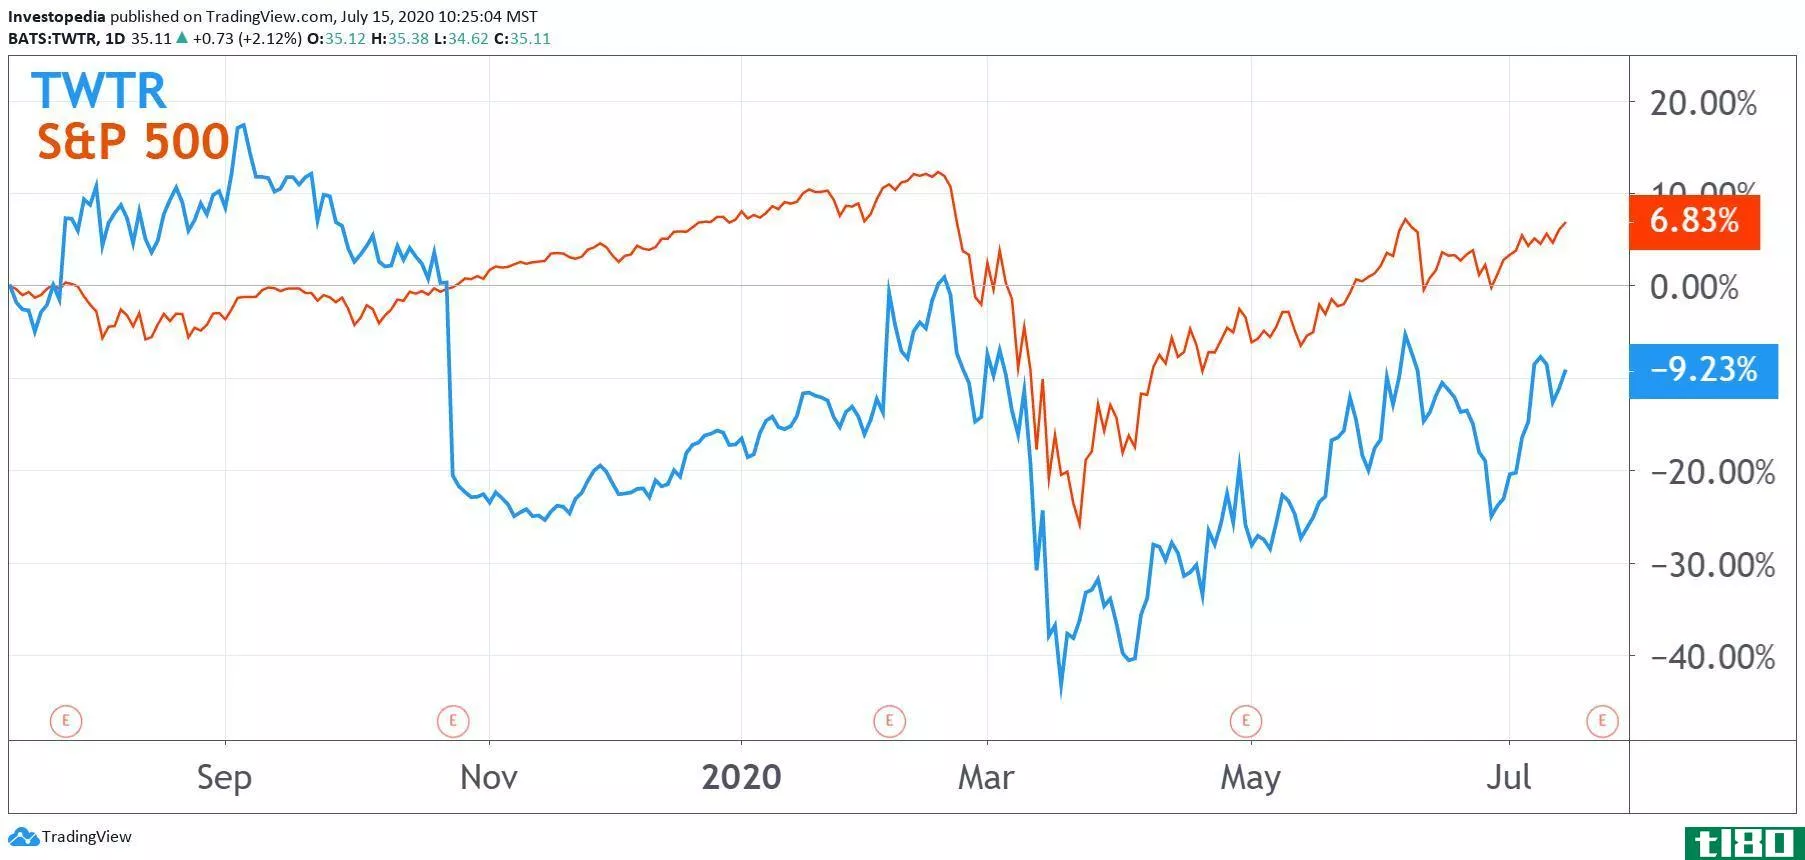 One Year Total Return for S&P 500 and Twitter